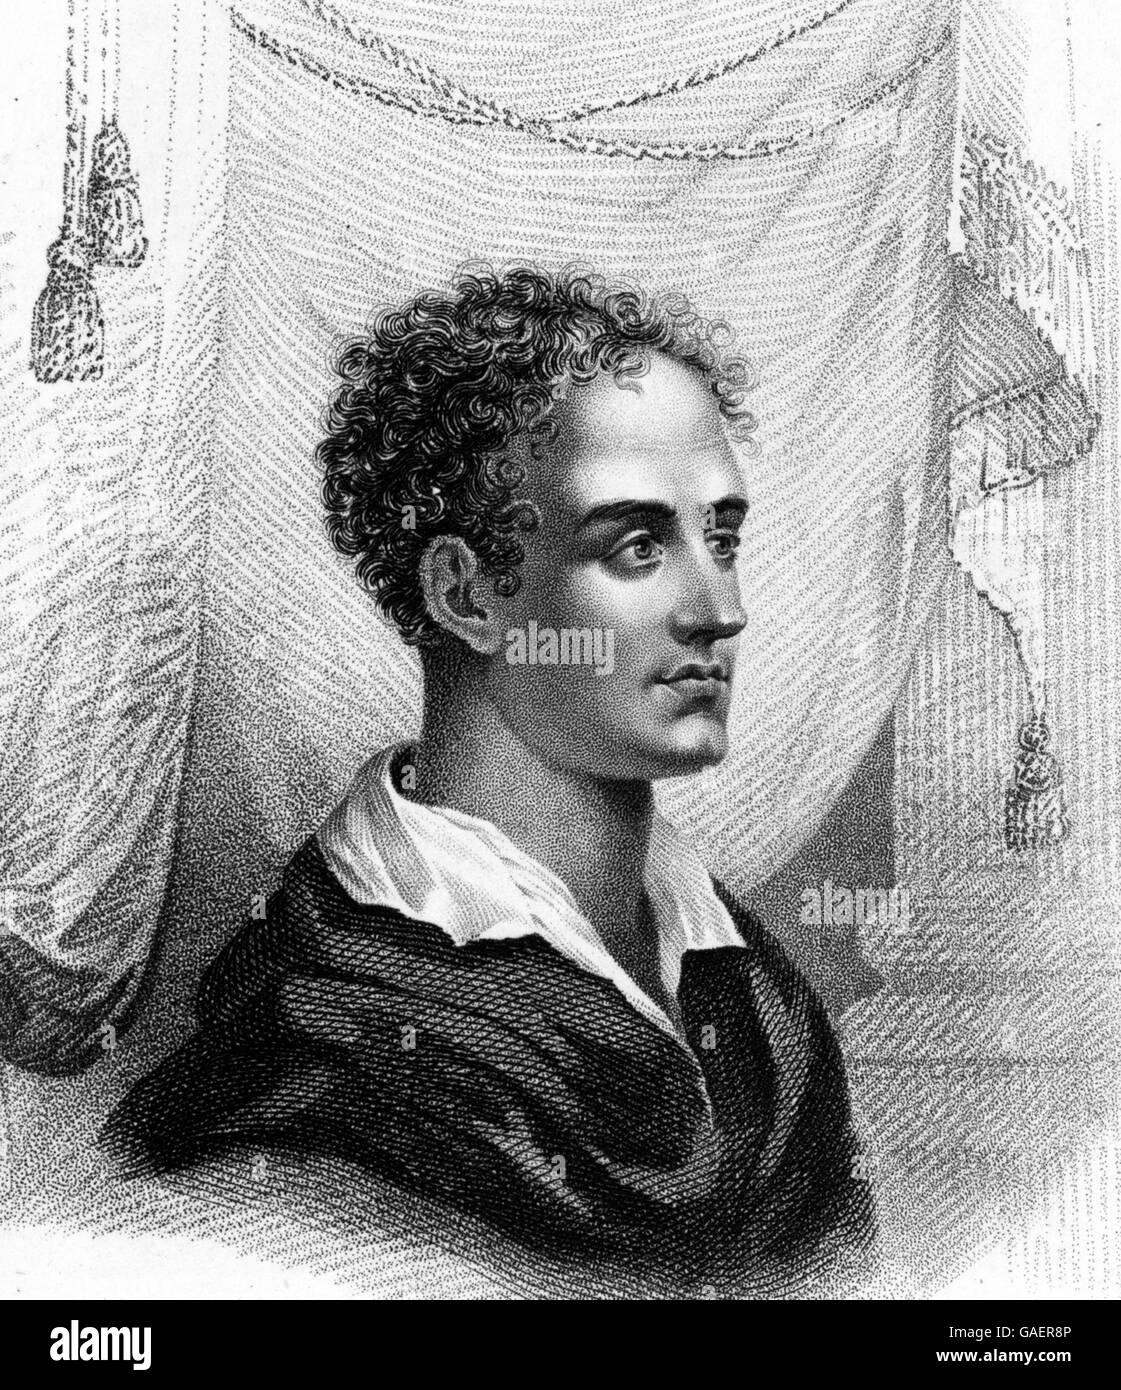 Lord Byron (1788-1824), an English poet and leading figure in the Romantic movement. Stipple engraving, illustrated by Thomas Addis Emmet, 1880 Stock Photo